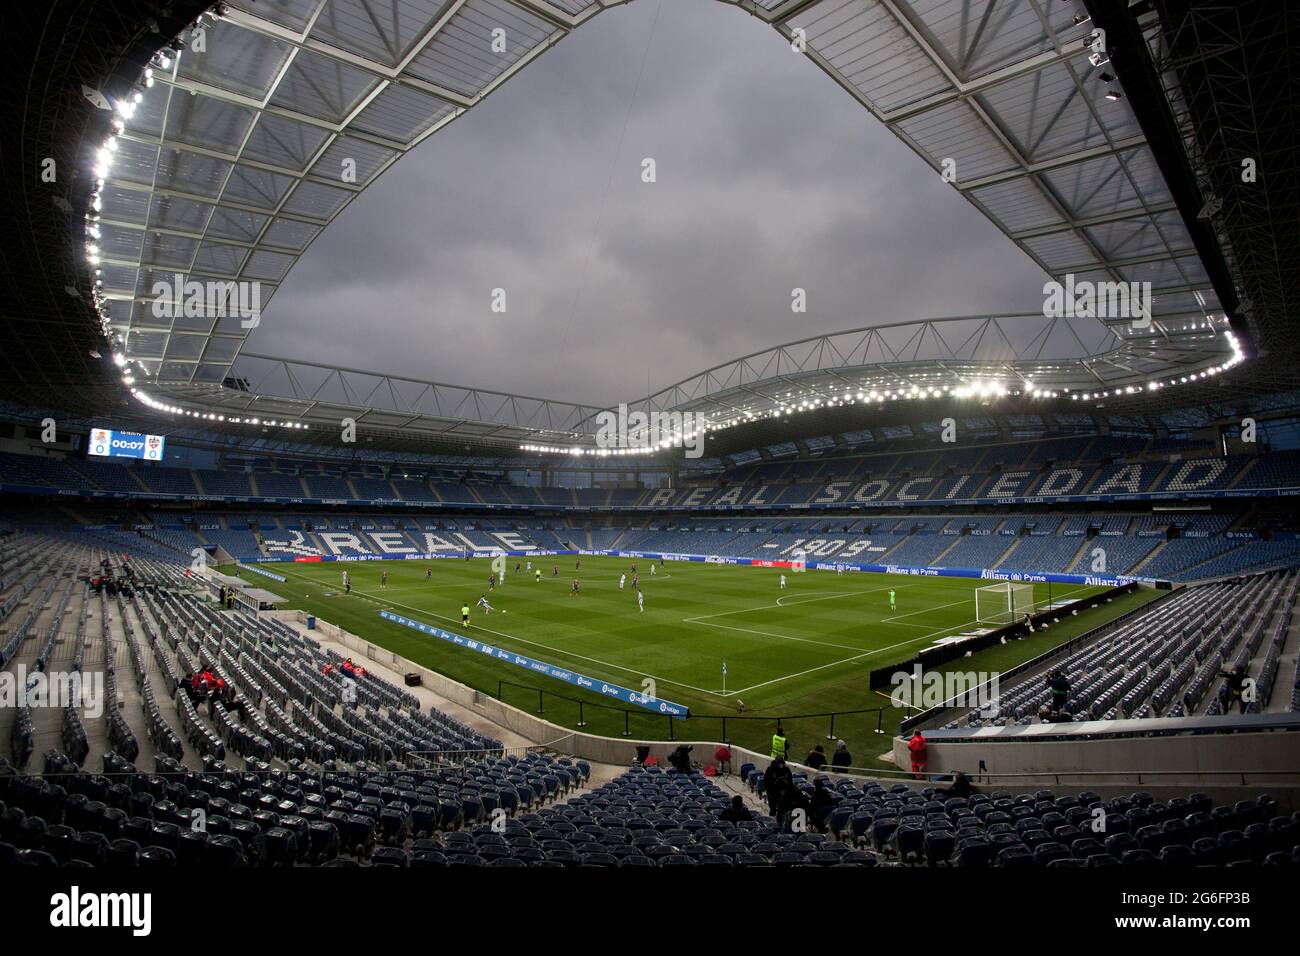 The Anoeta (Reale Arena) stadium, empty due to COVID, during a match of the Real Sociedad. San Sebastian, Spain. Stock Photo